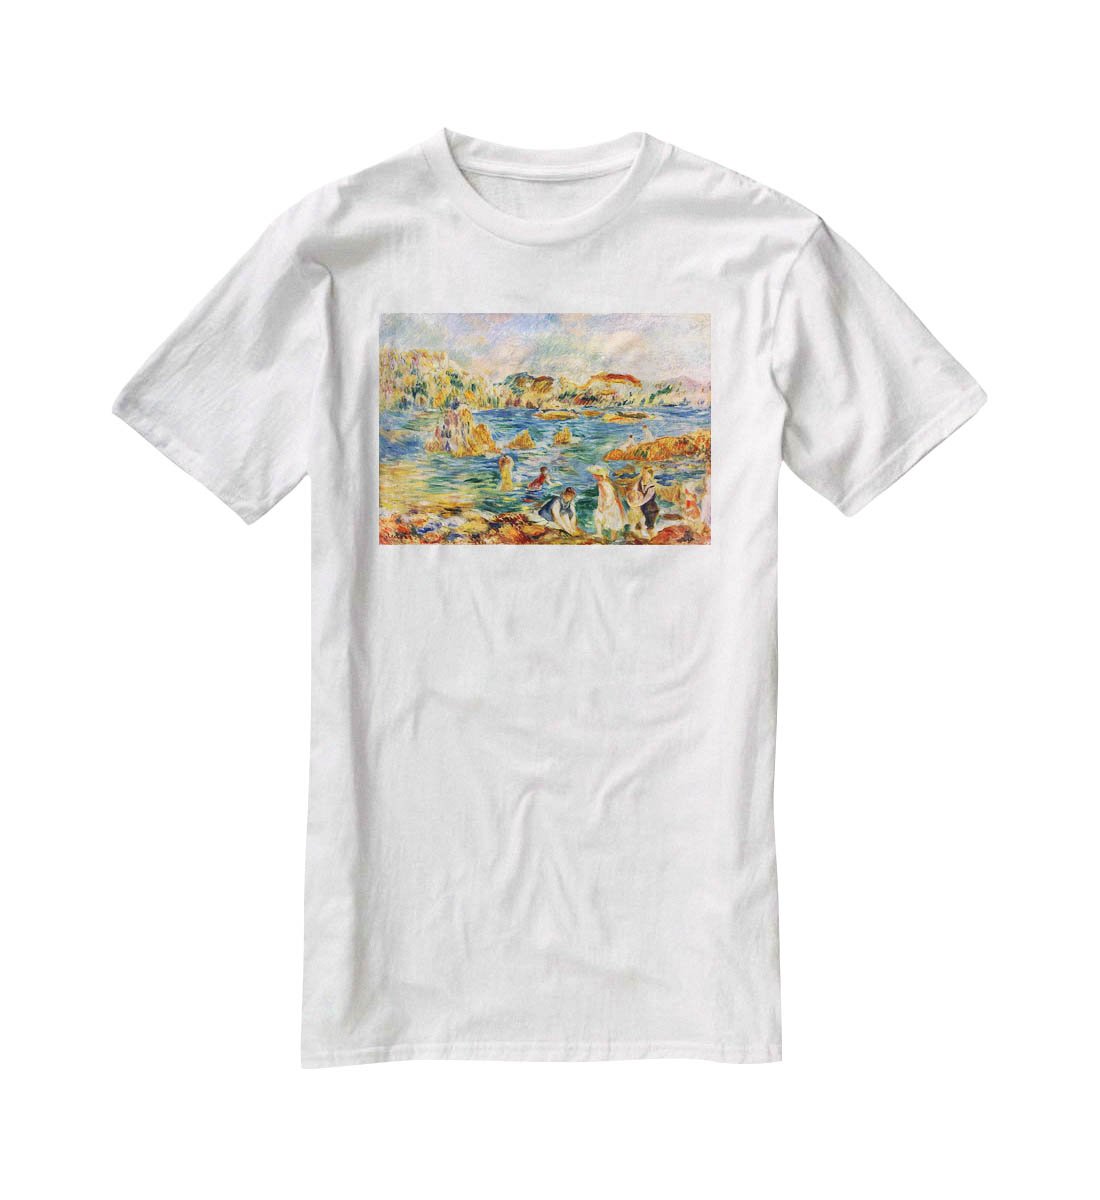 At the beach of Guernesey by Renoir T-Shirt - Canvas Art Rocks - 5